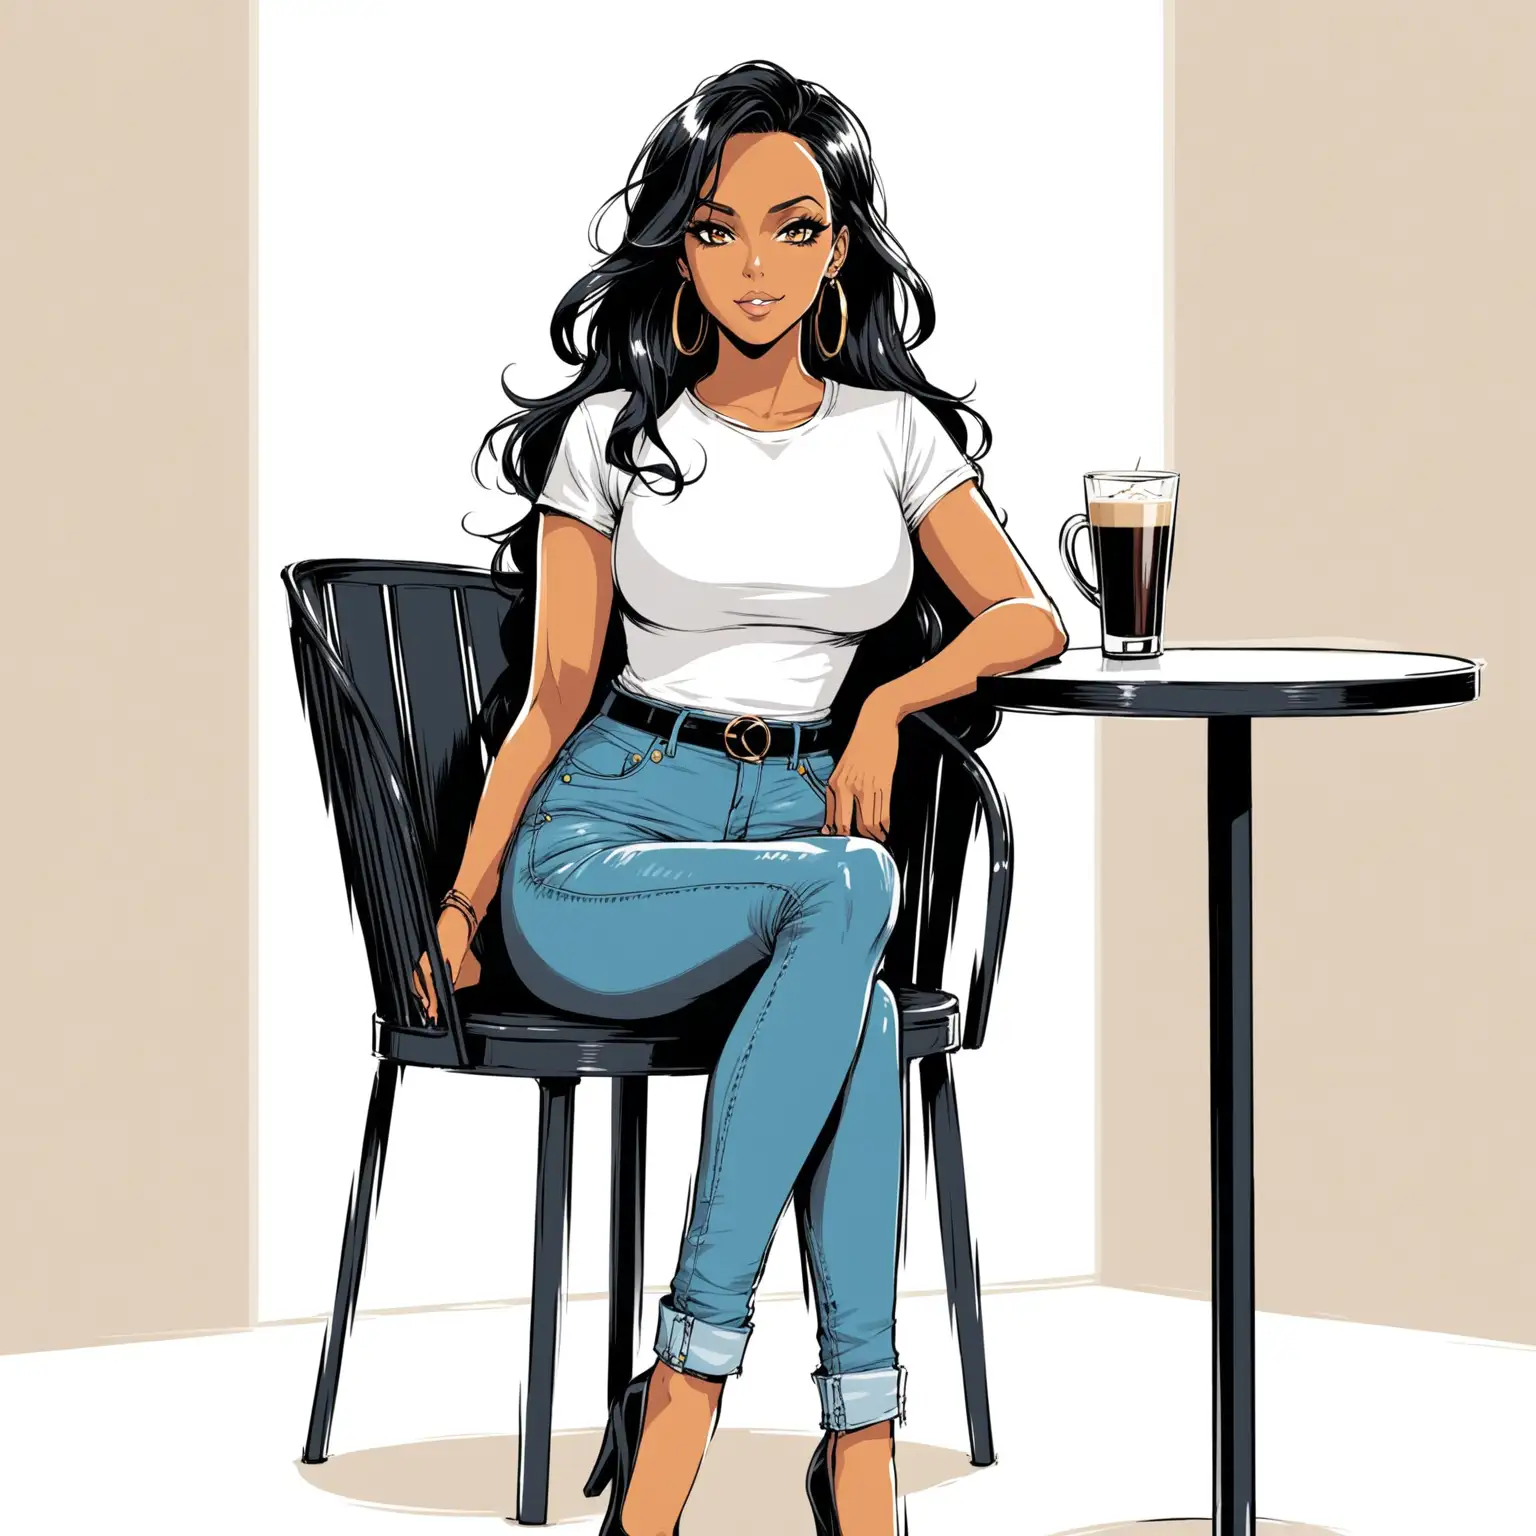 Comic Style Portrait Elegant Woman Inspired by Amel Bent in Jeans and White TShirt Sitting on Caf Terrace Chair